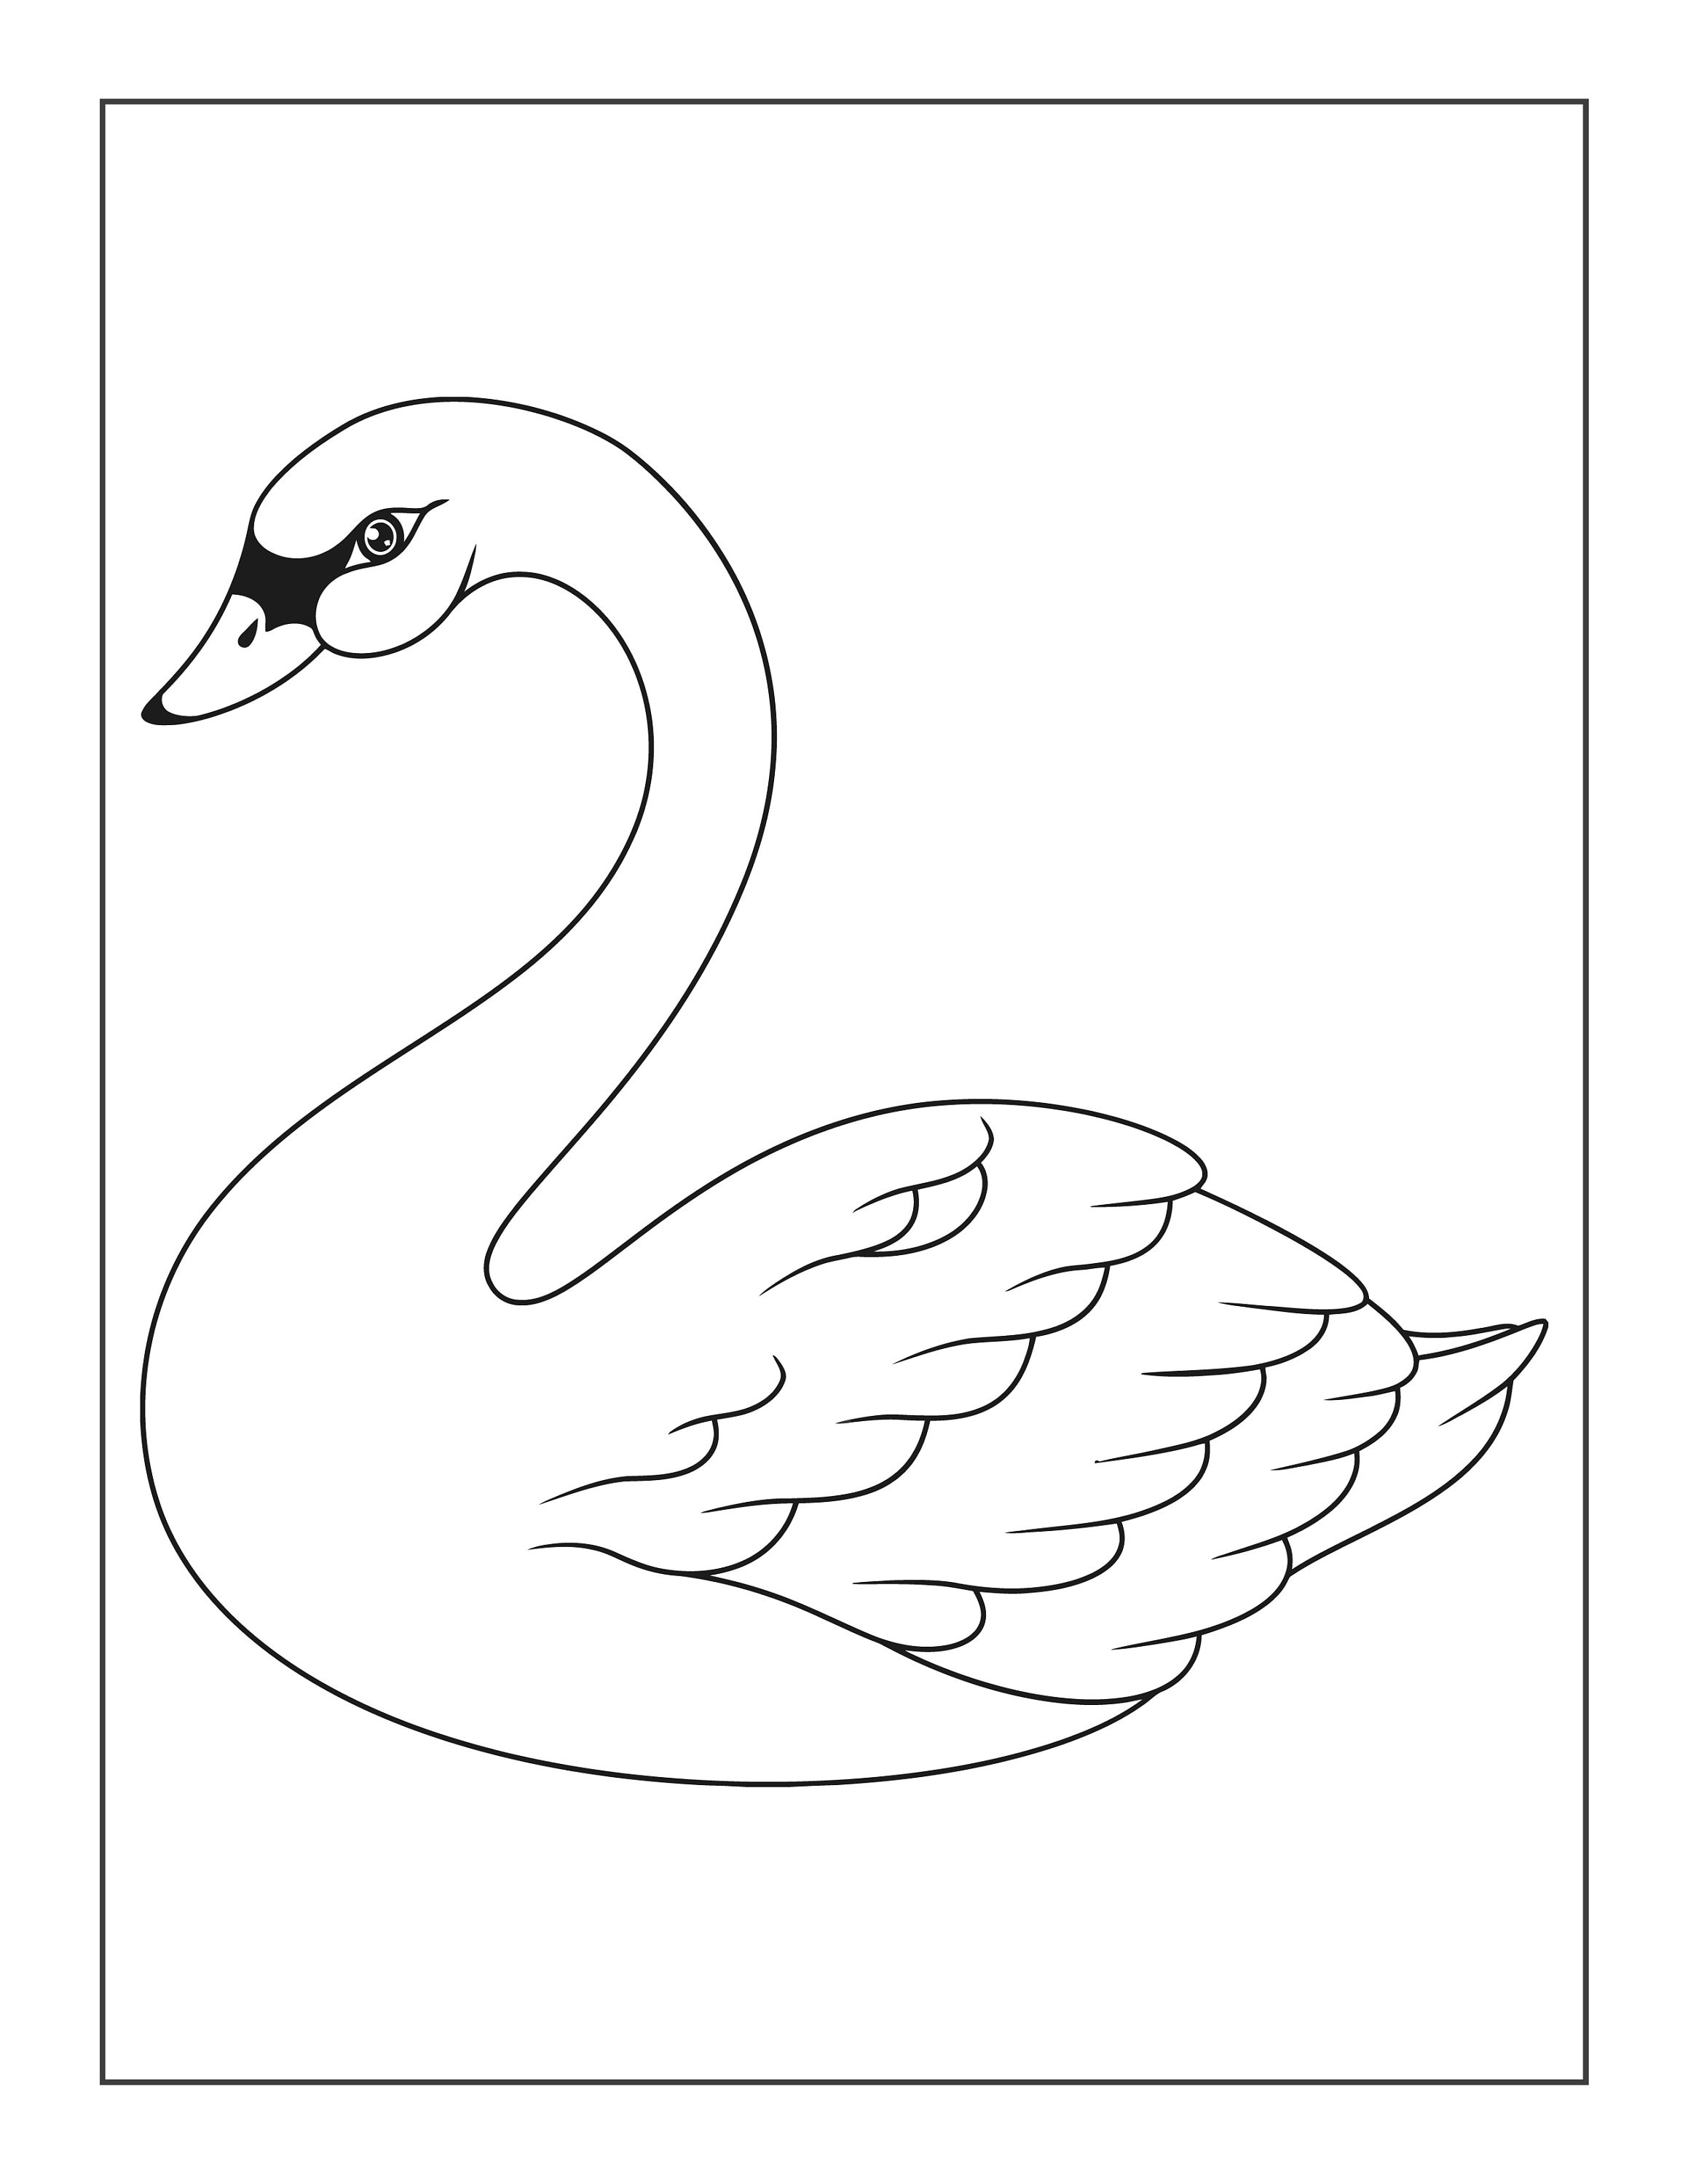 20 Printable Swan Coloring Pages for Children and Adults - Etsy